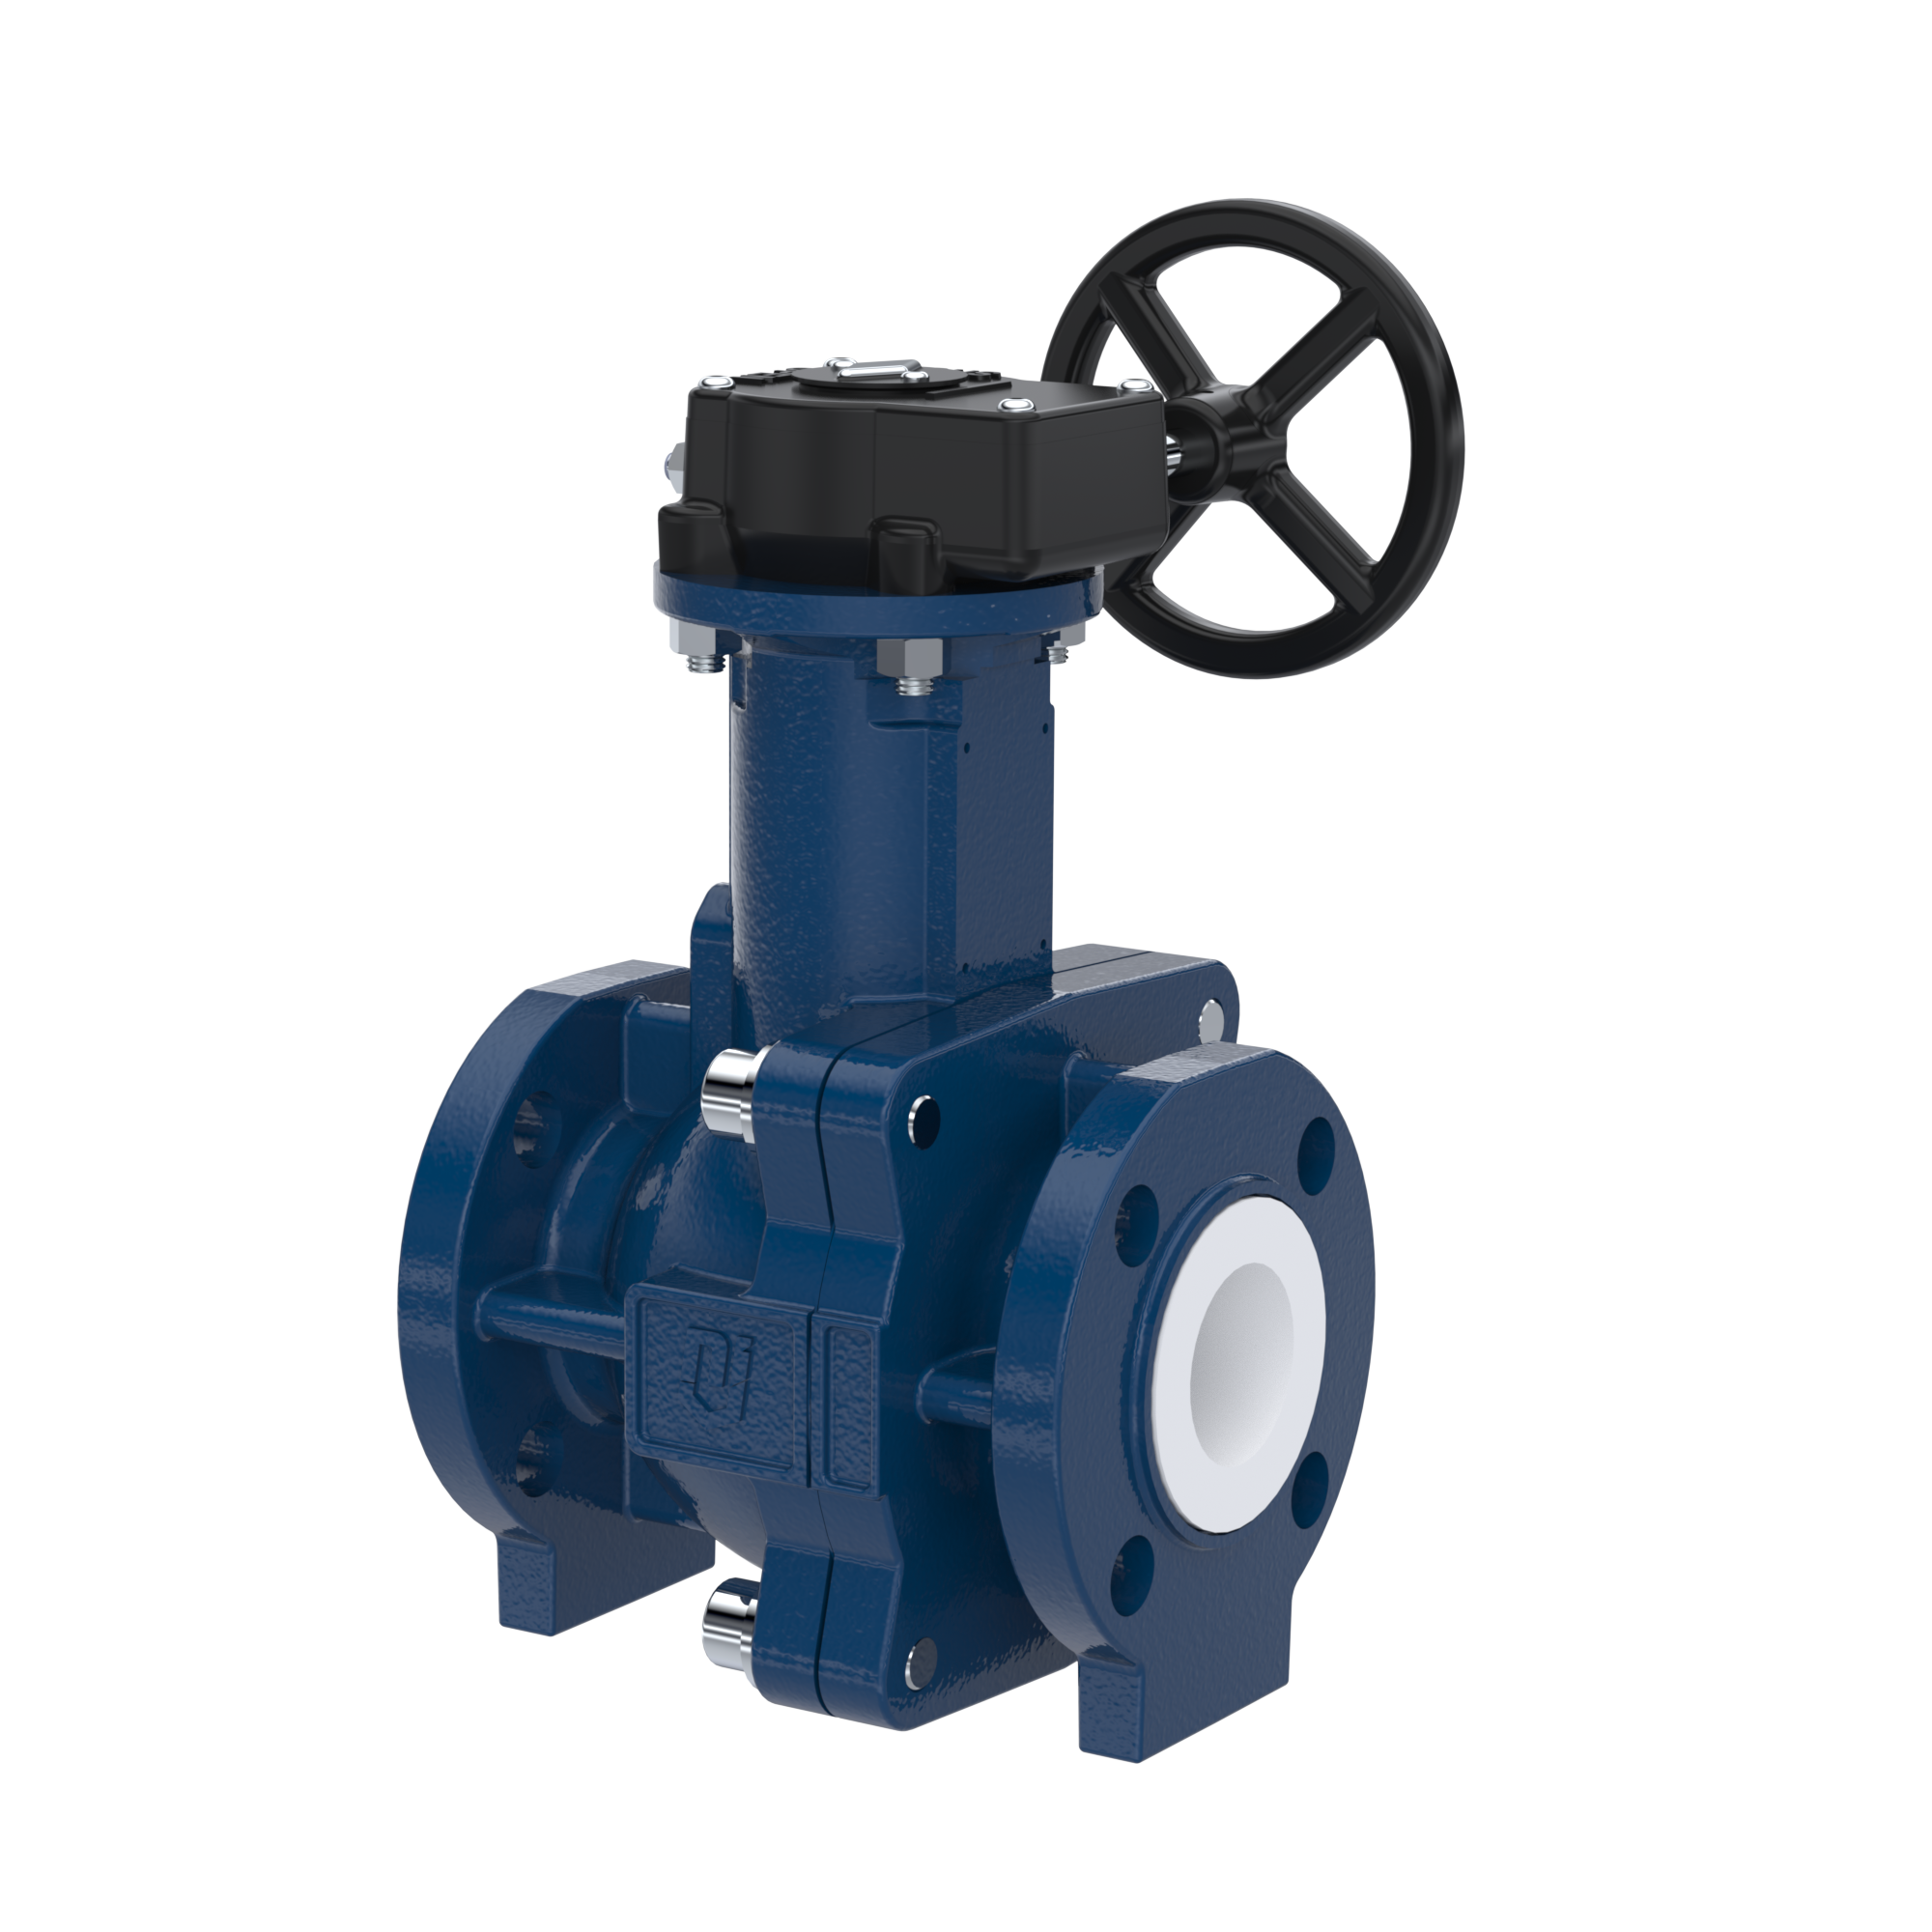 PFA-flange ball valve FK13 DN15 - 1/2" inch ANSI 150 made of spheroidal graphite cast iron with worm gear